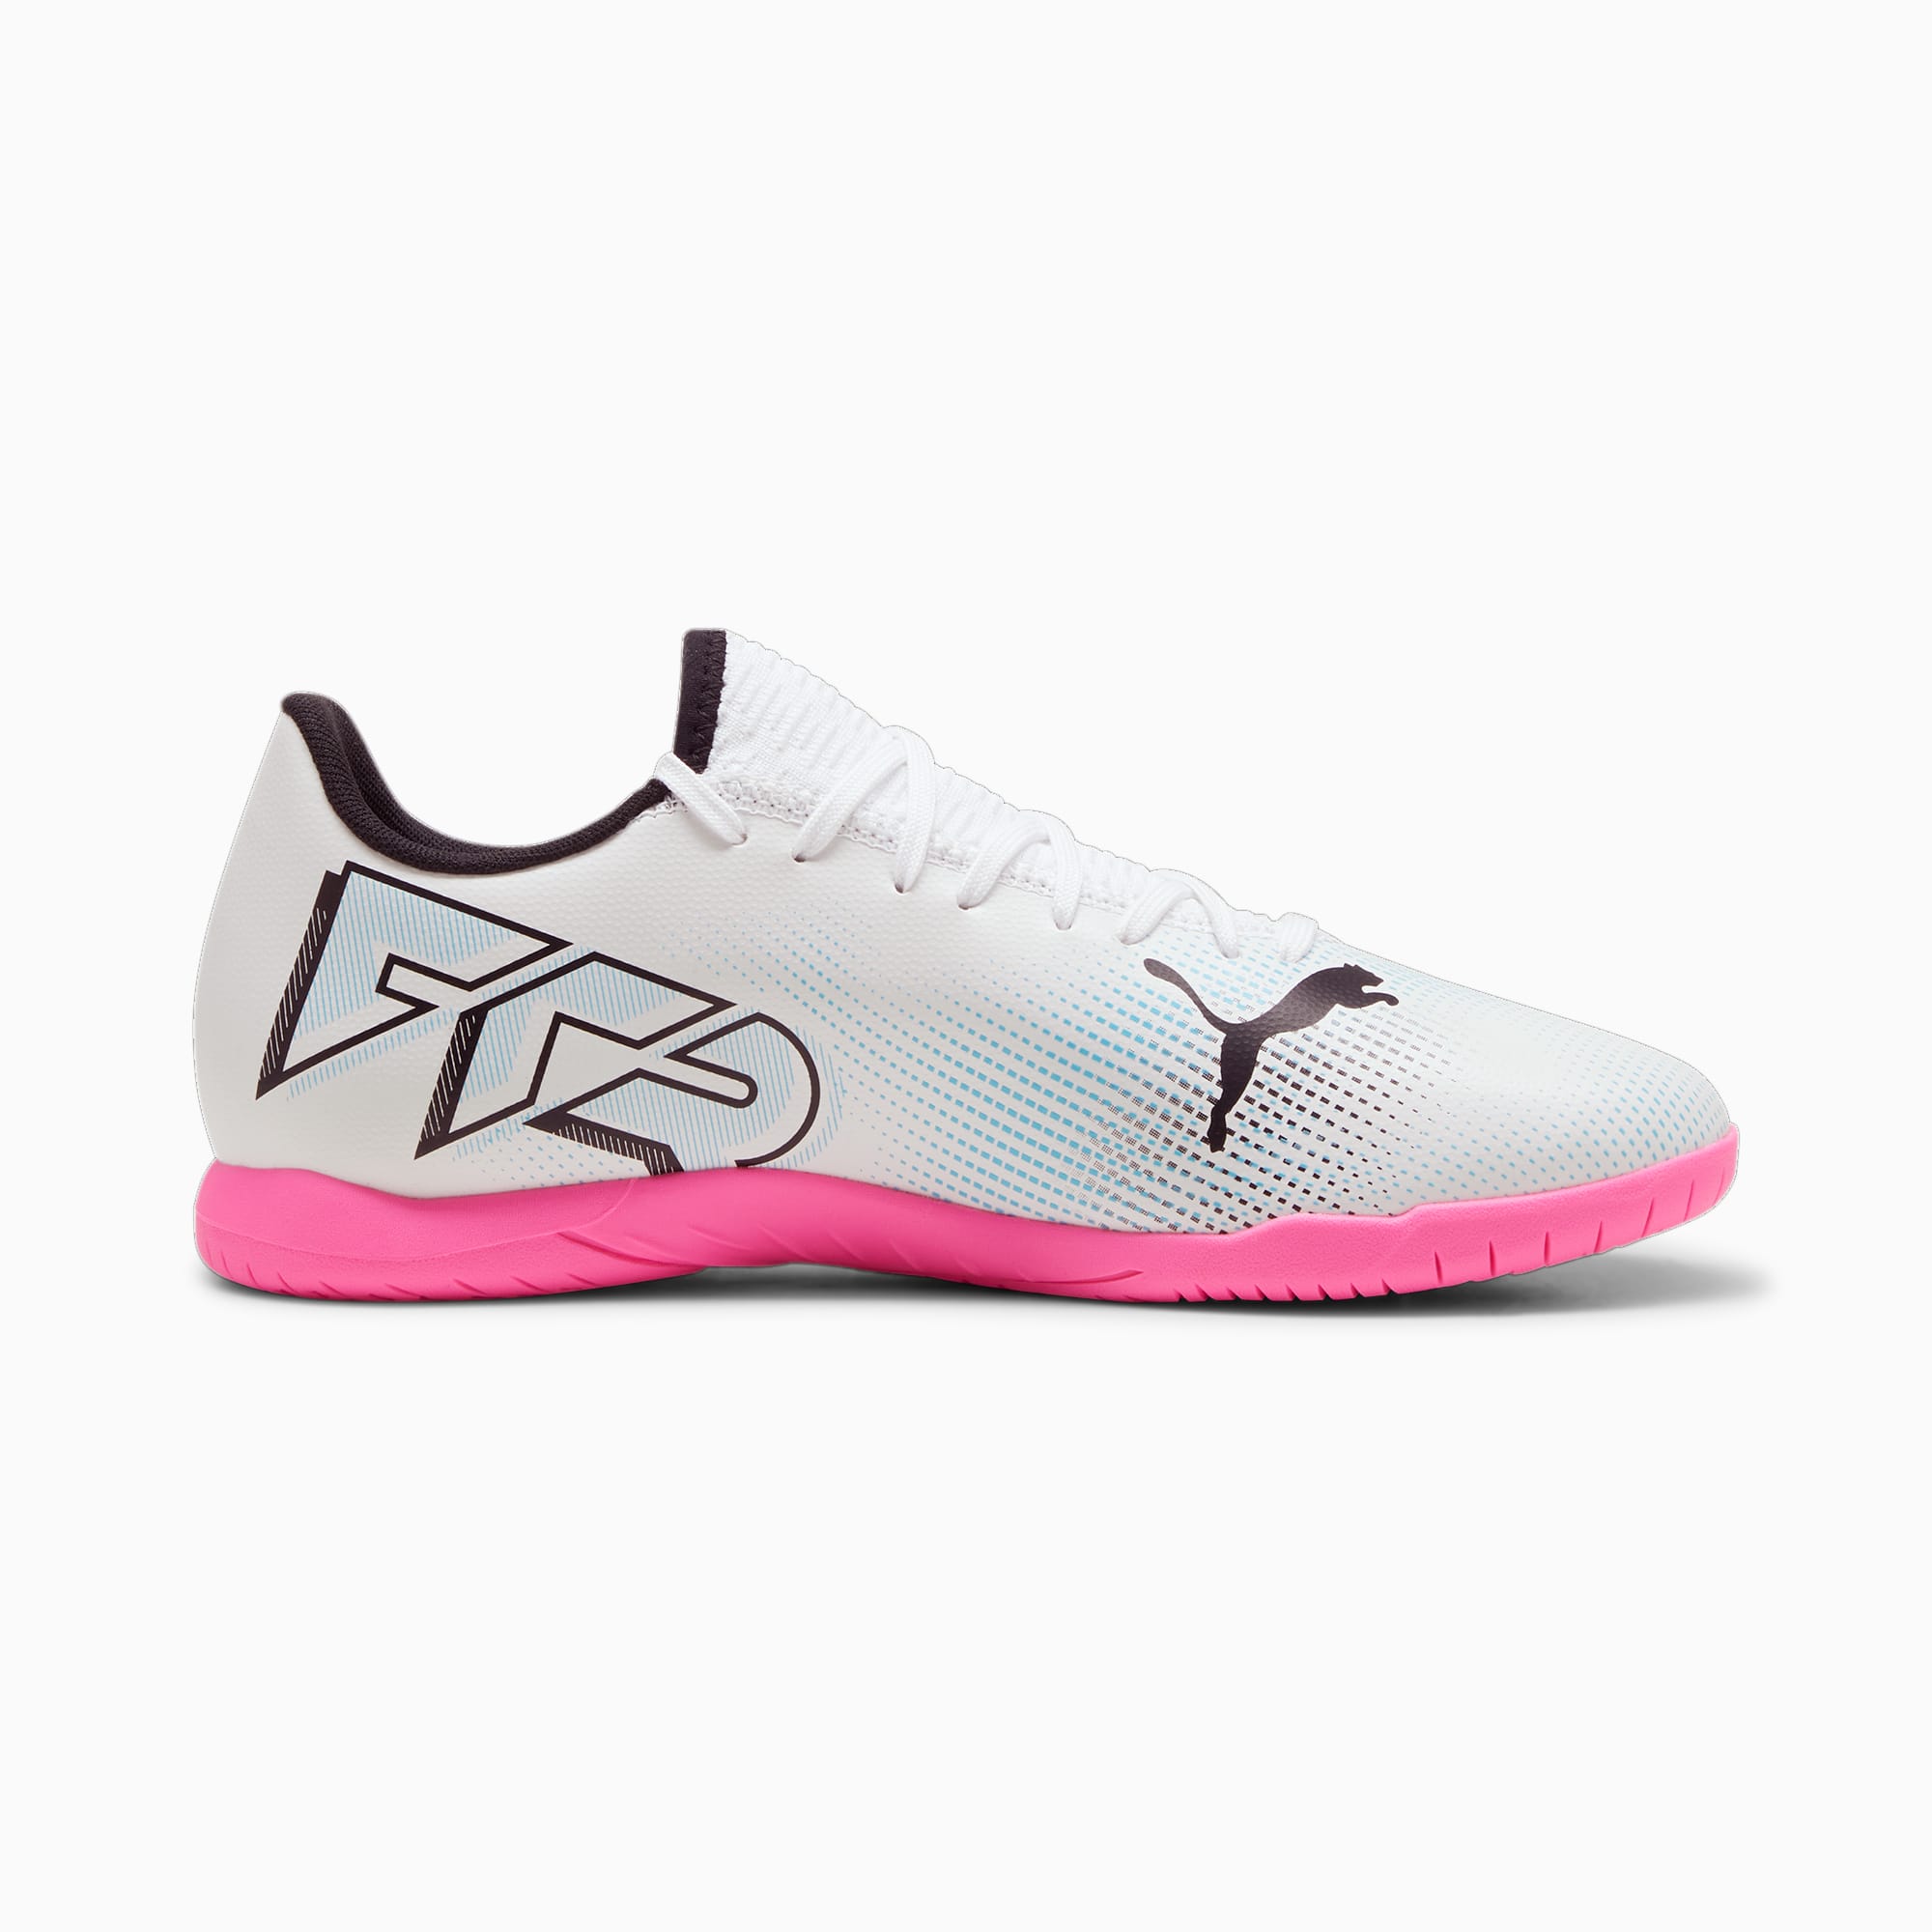 Men's PUMA Future 7 Play IT Football Boots, White/Black/Poison Pink, Size 39, Shoes